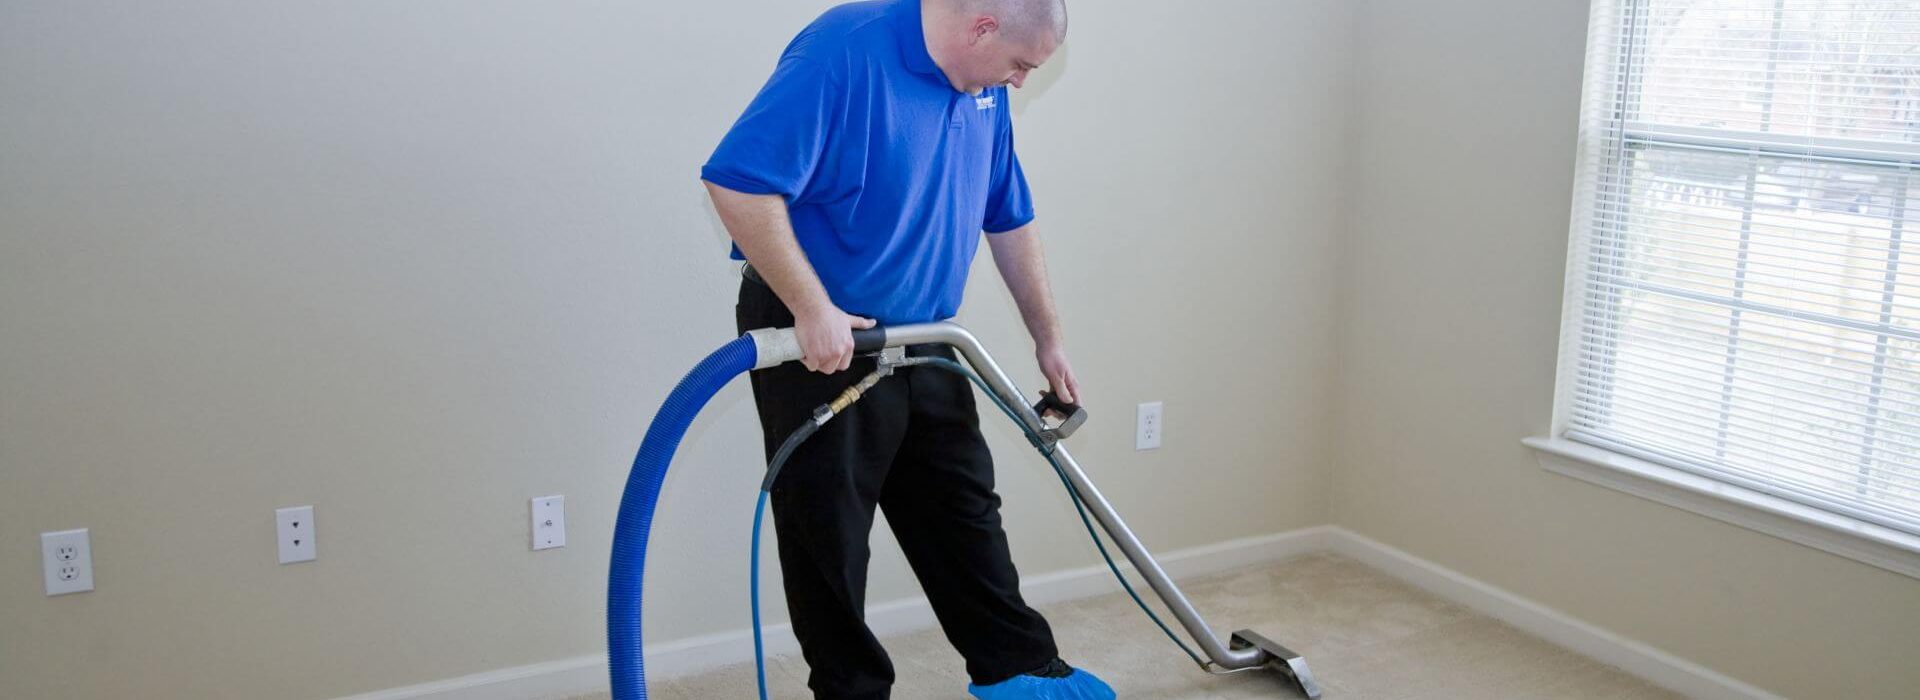 Acquire More Knowledge About Carpet Cleaning With These Simple Tips